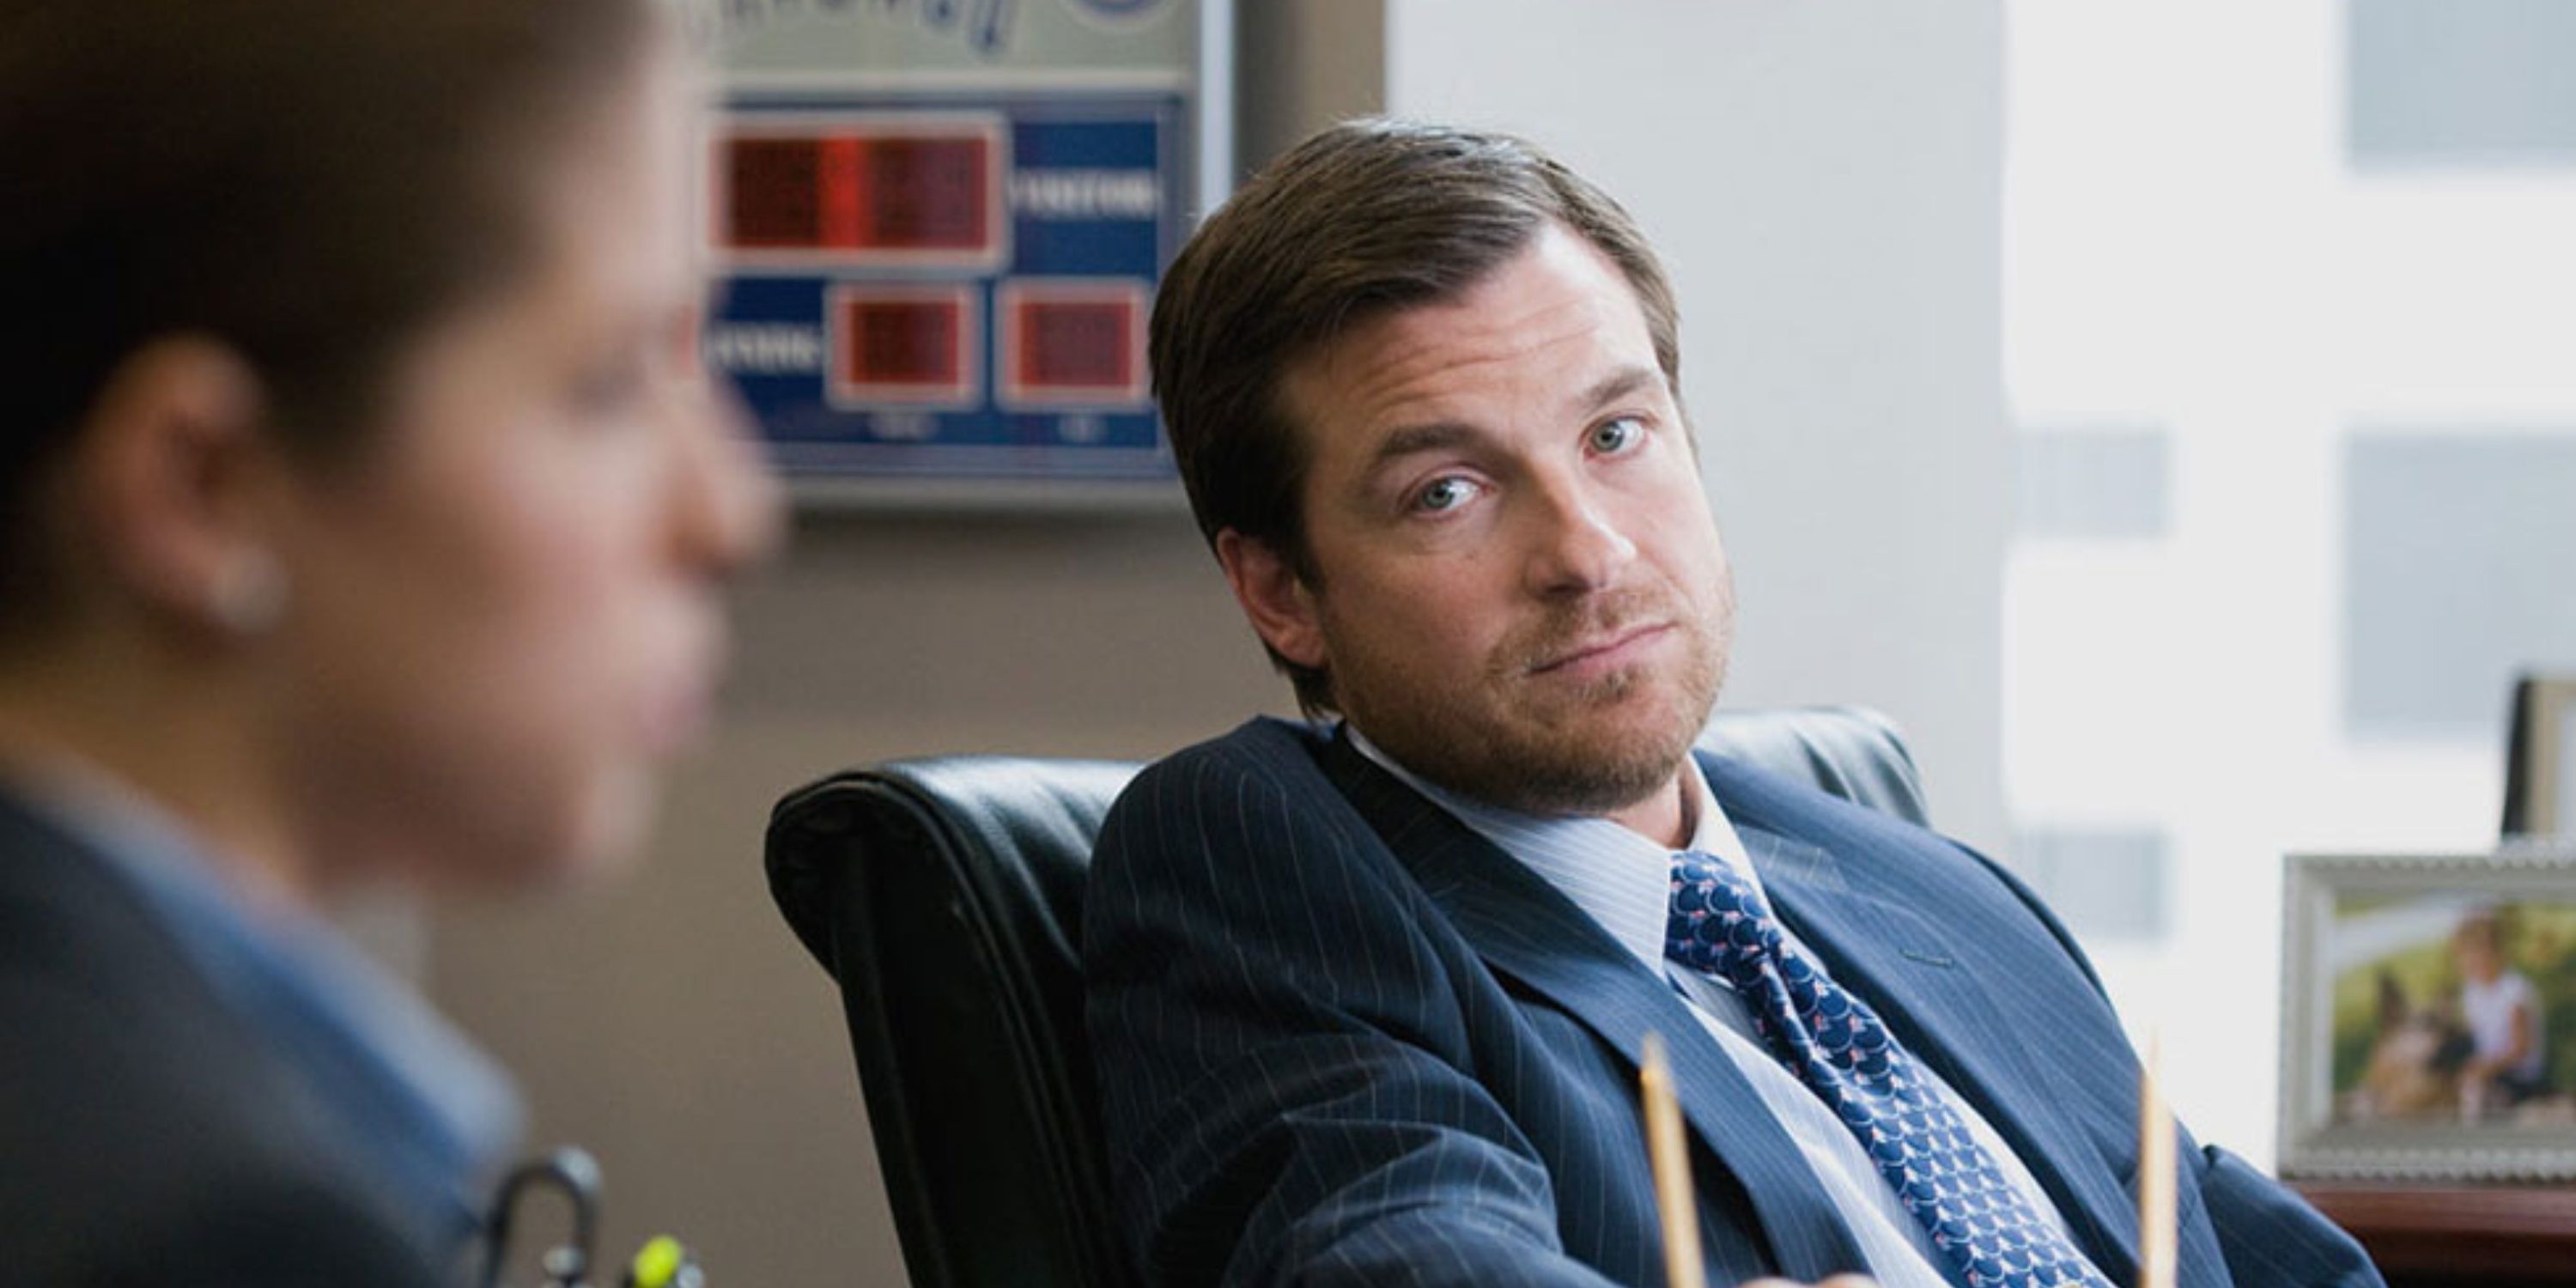 Jason Bateman as Craig Greggory leaning back on his chair and looking at another man in Up in the Air.